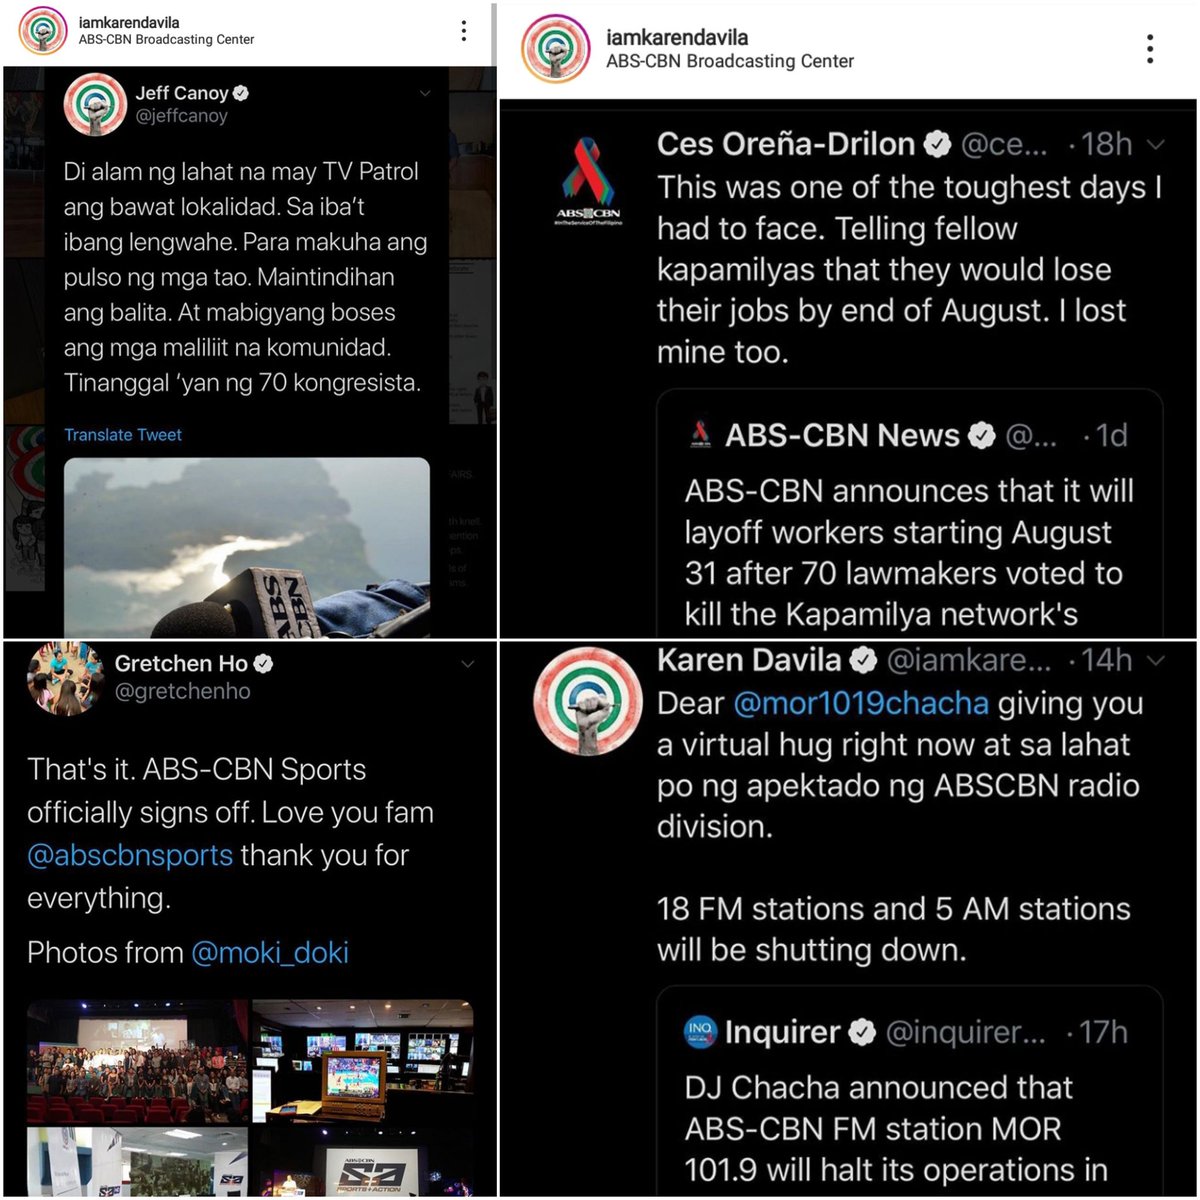 Sharing the messages/posts of ABS-CBN journalists as a significant number of the network's employees face unemployment amidst an ongoing health pandemic after 70 congressmen chose to deny the company a franchise. nadine igs (July 18, 2020)/iamkarendavila